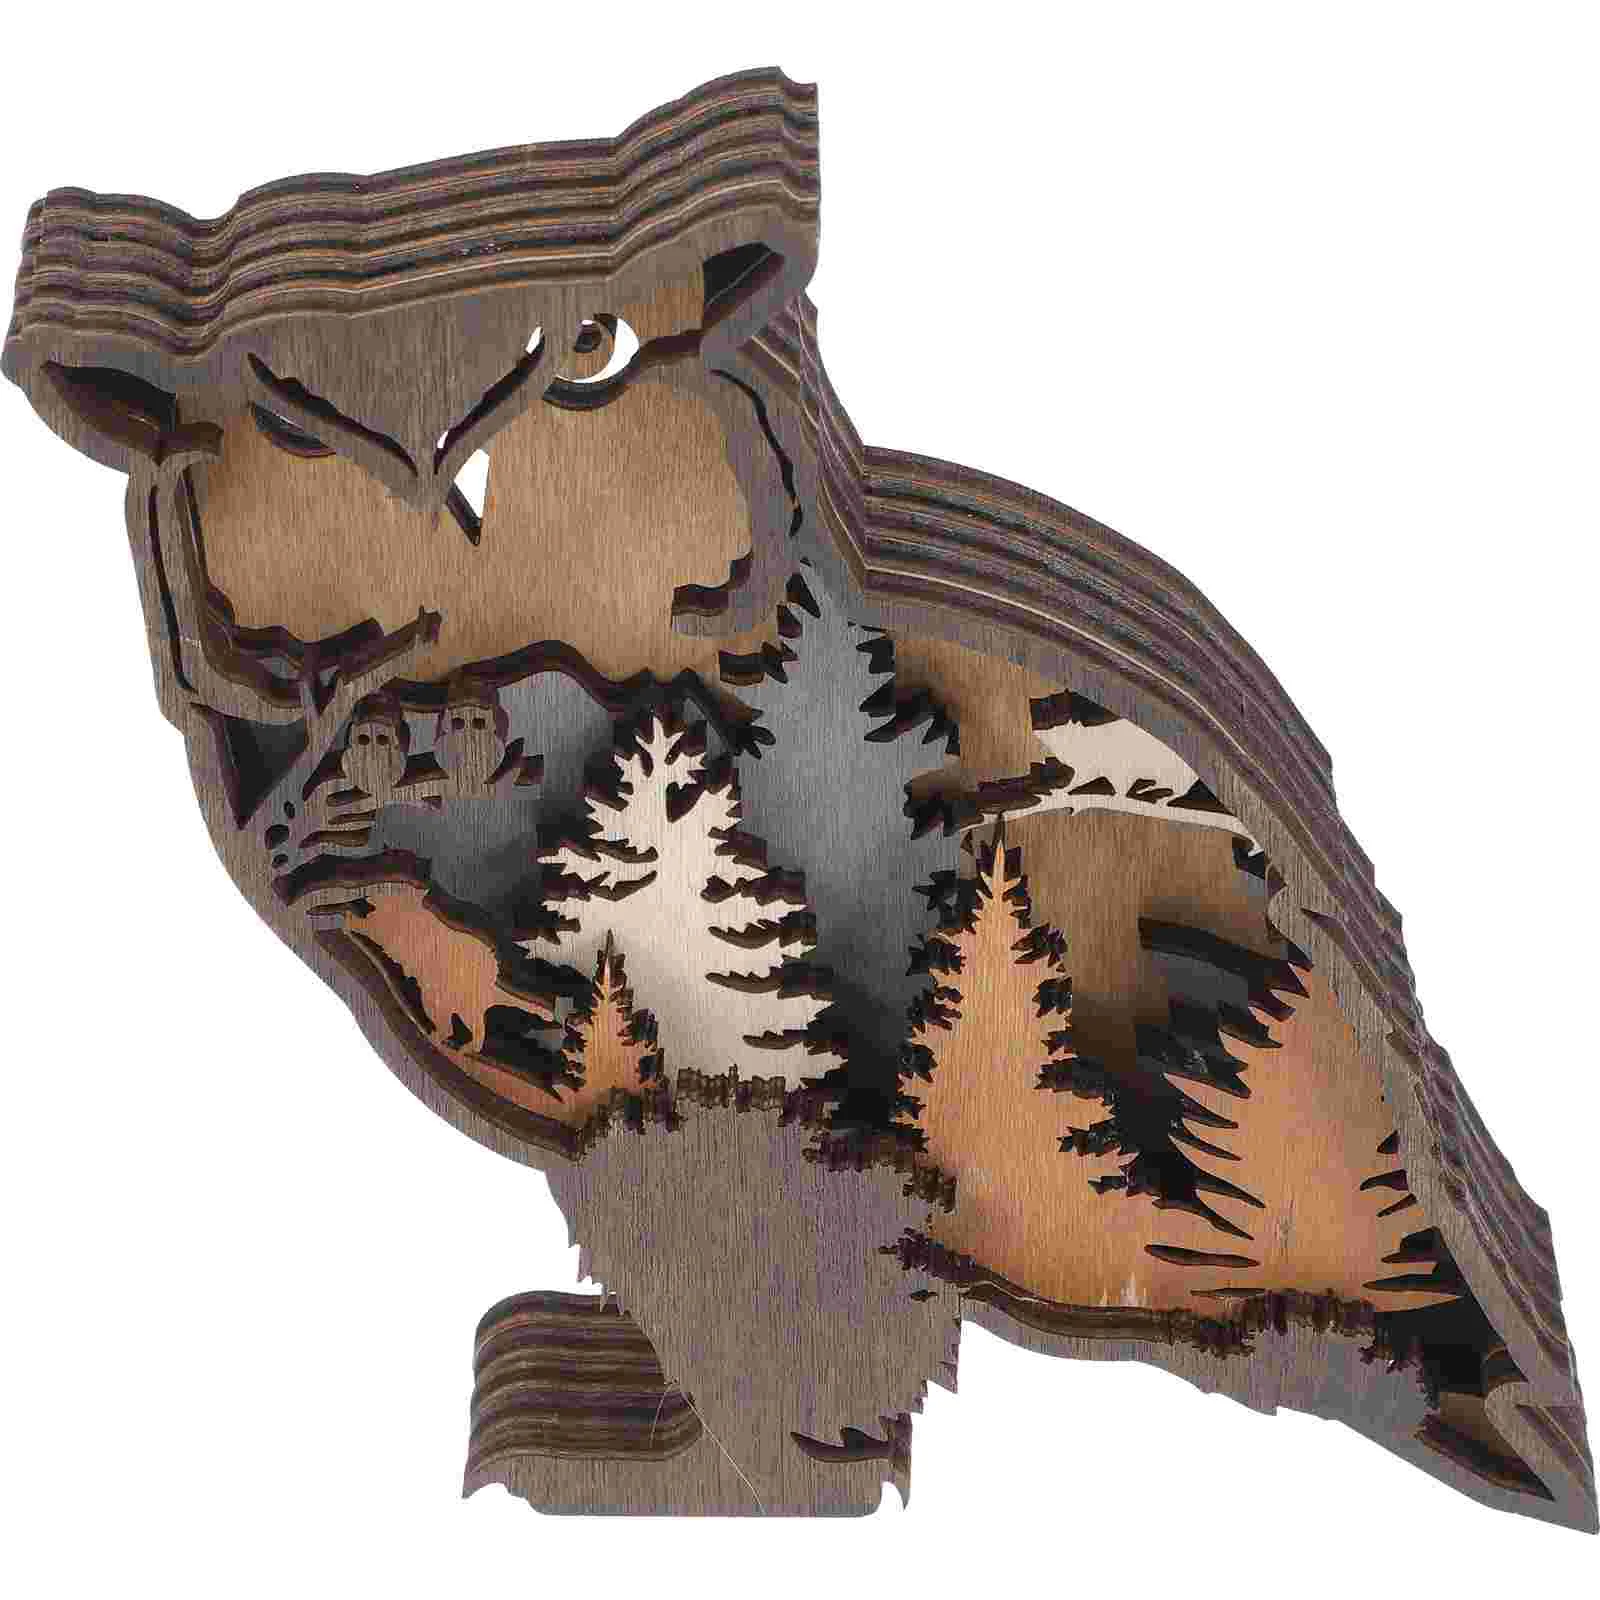 

Owl Ornament Wooden Decor Woodland Household Wall Decorations Boxwood Rustic Living Room Cabin Log